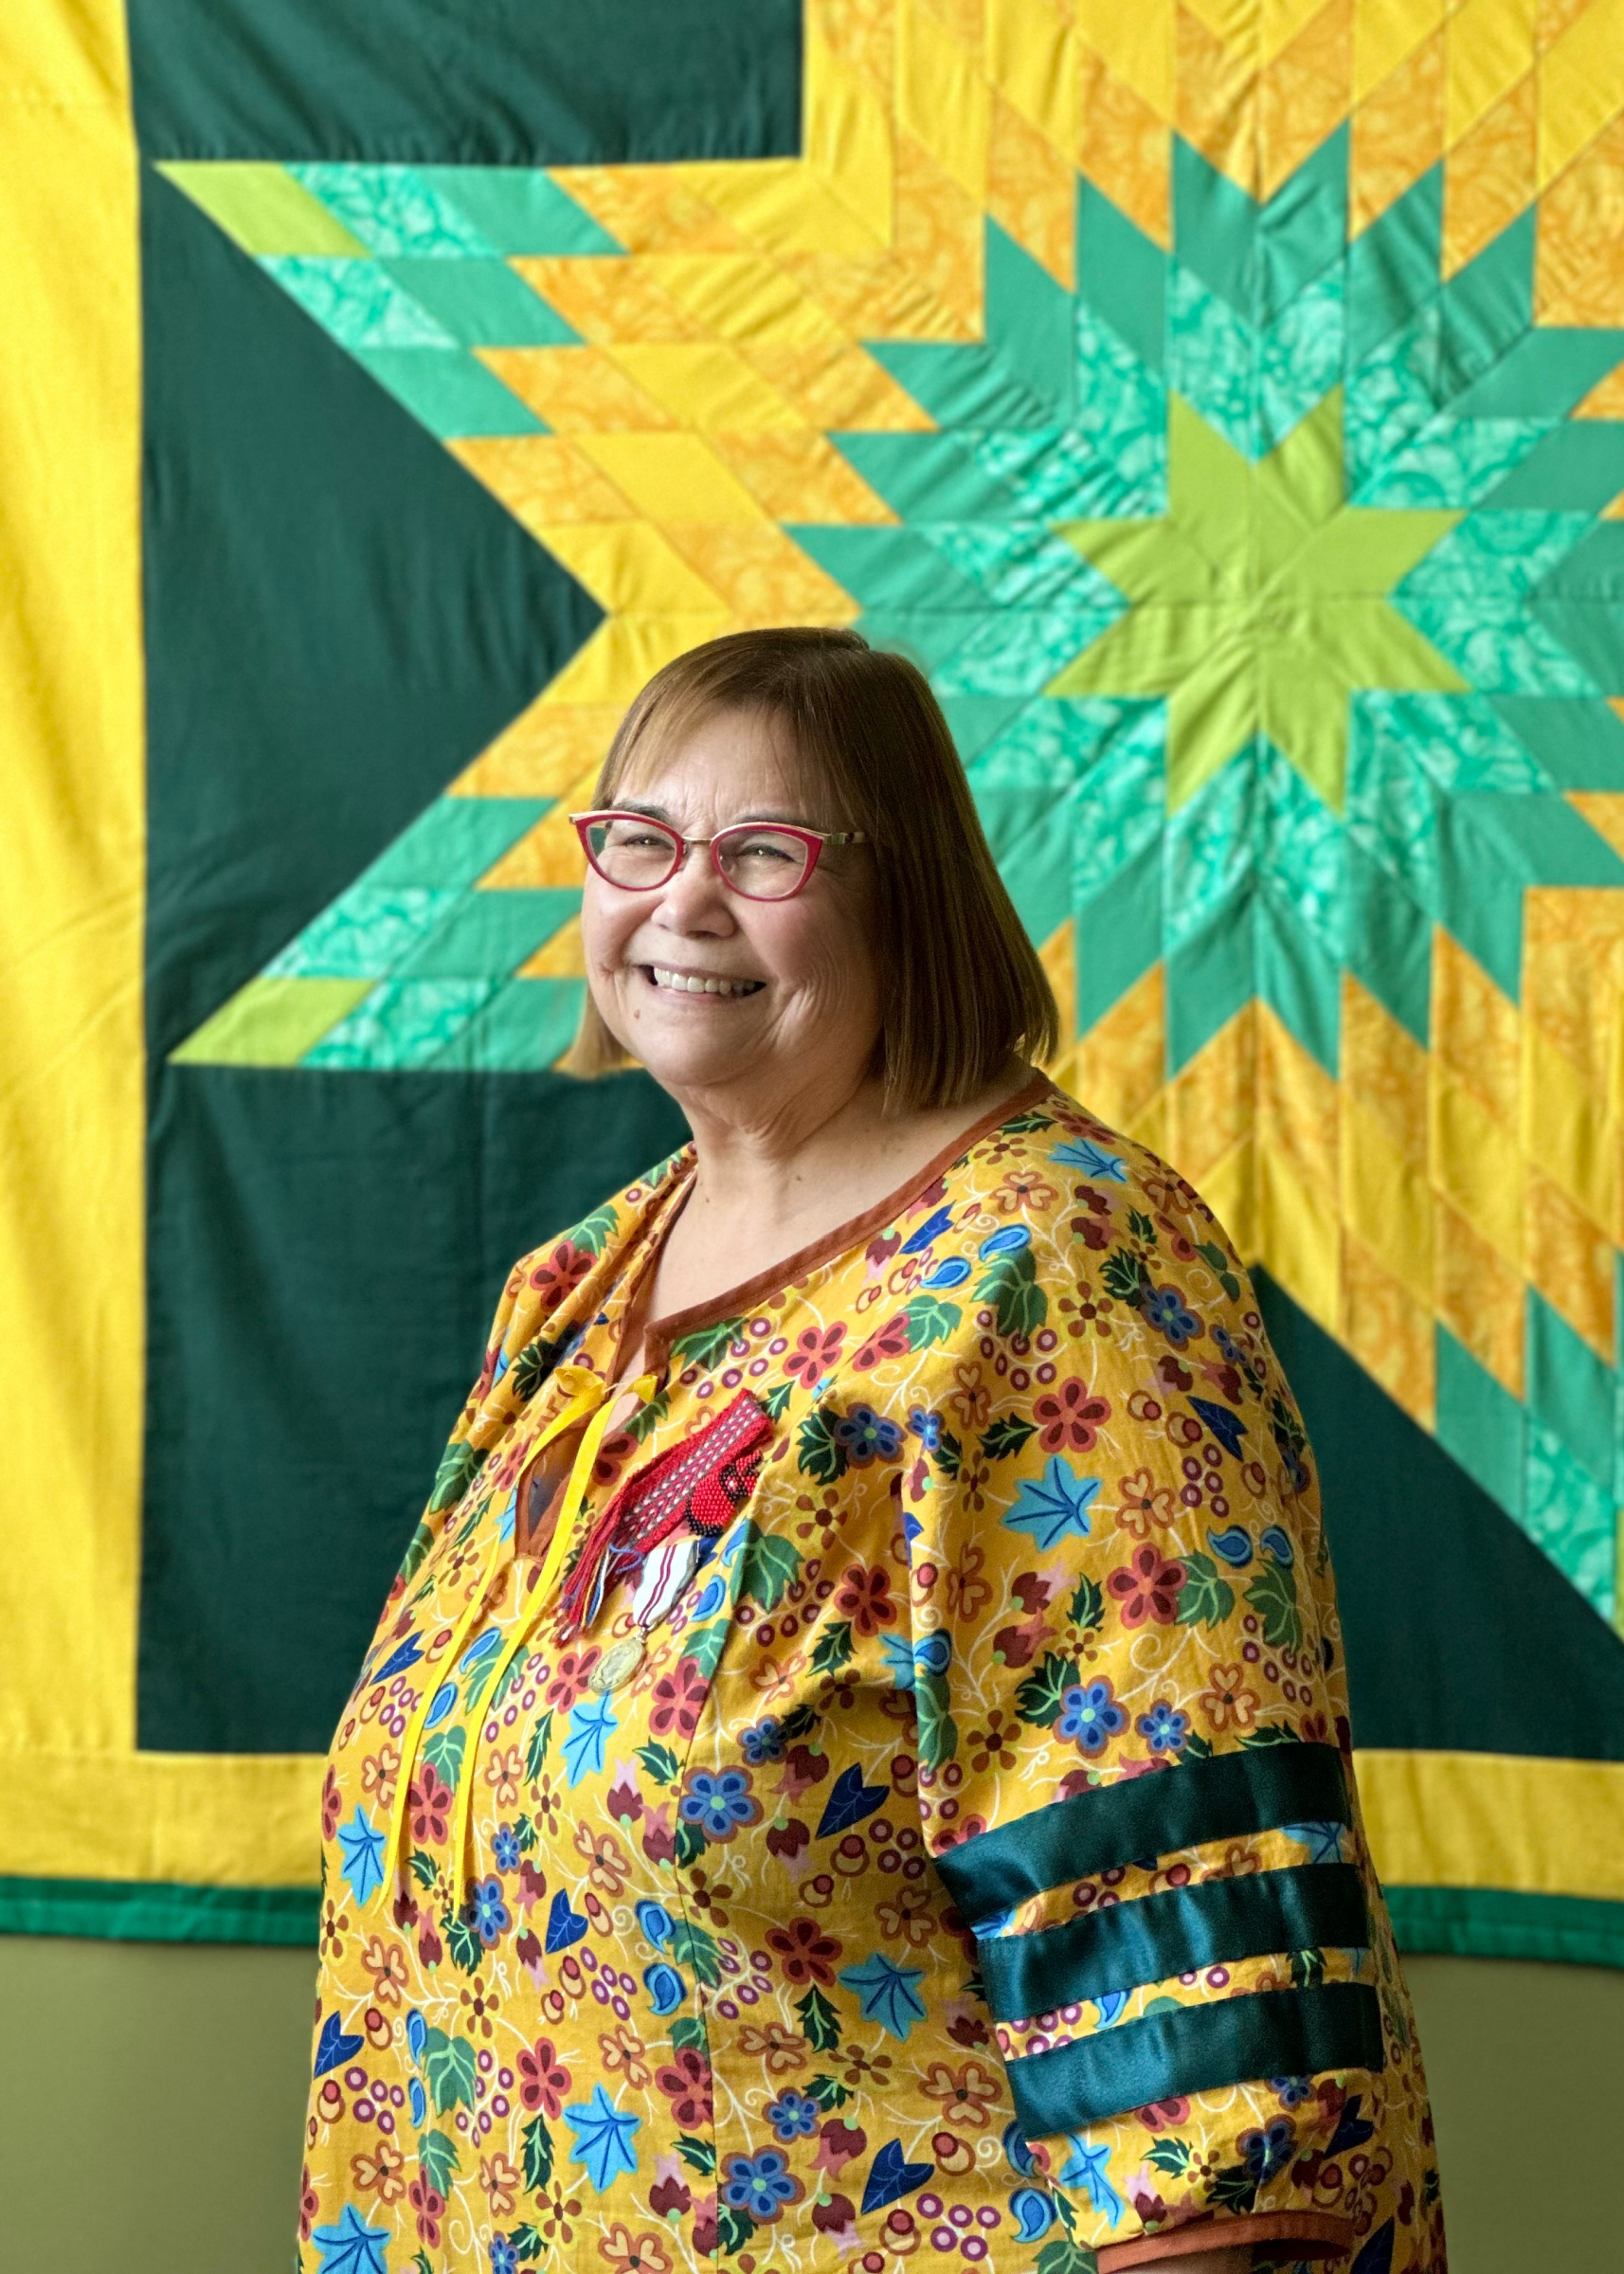 Dr. Florence Glanfield in yellow patterned dress standing in front of yellow and green quilt